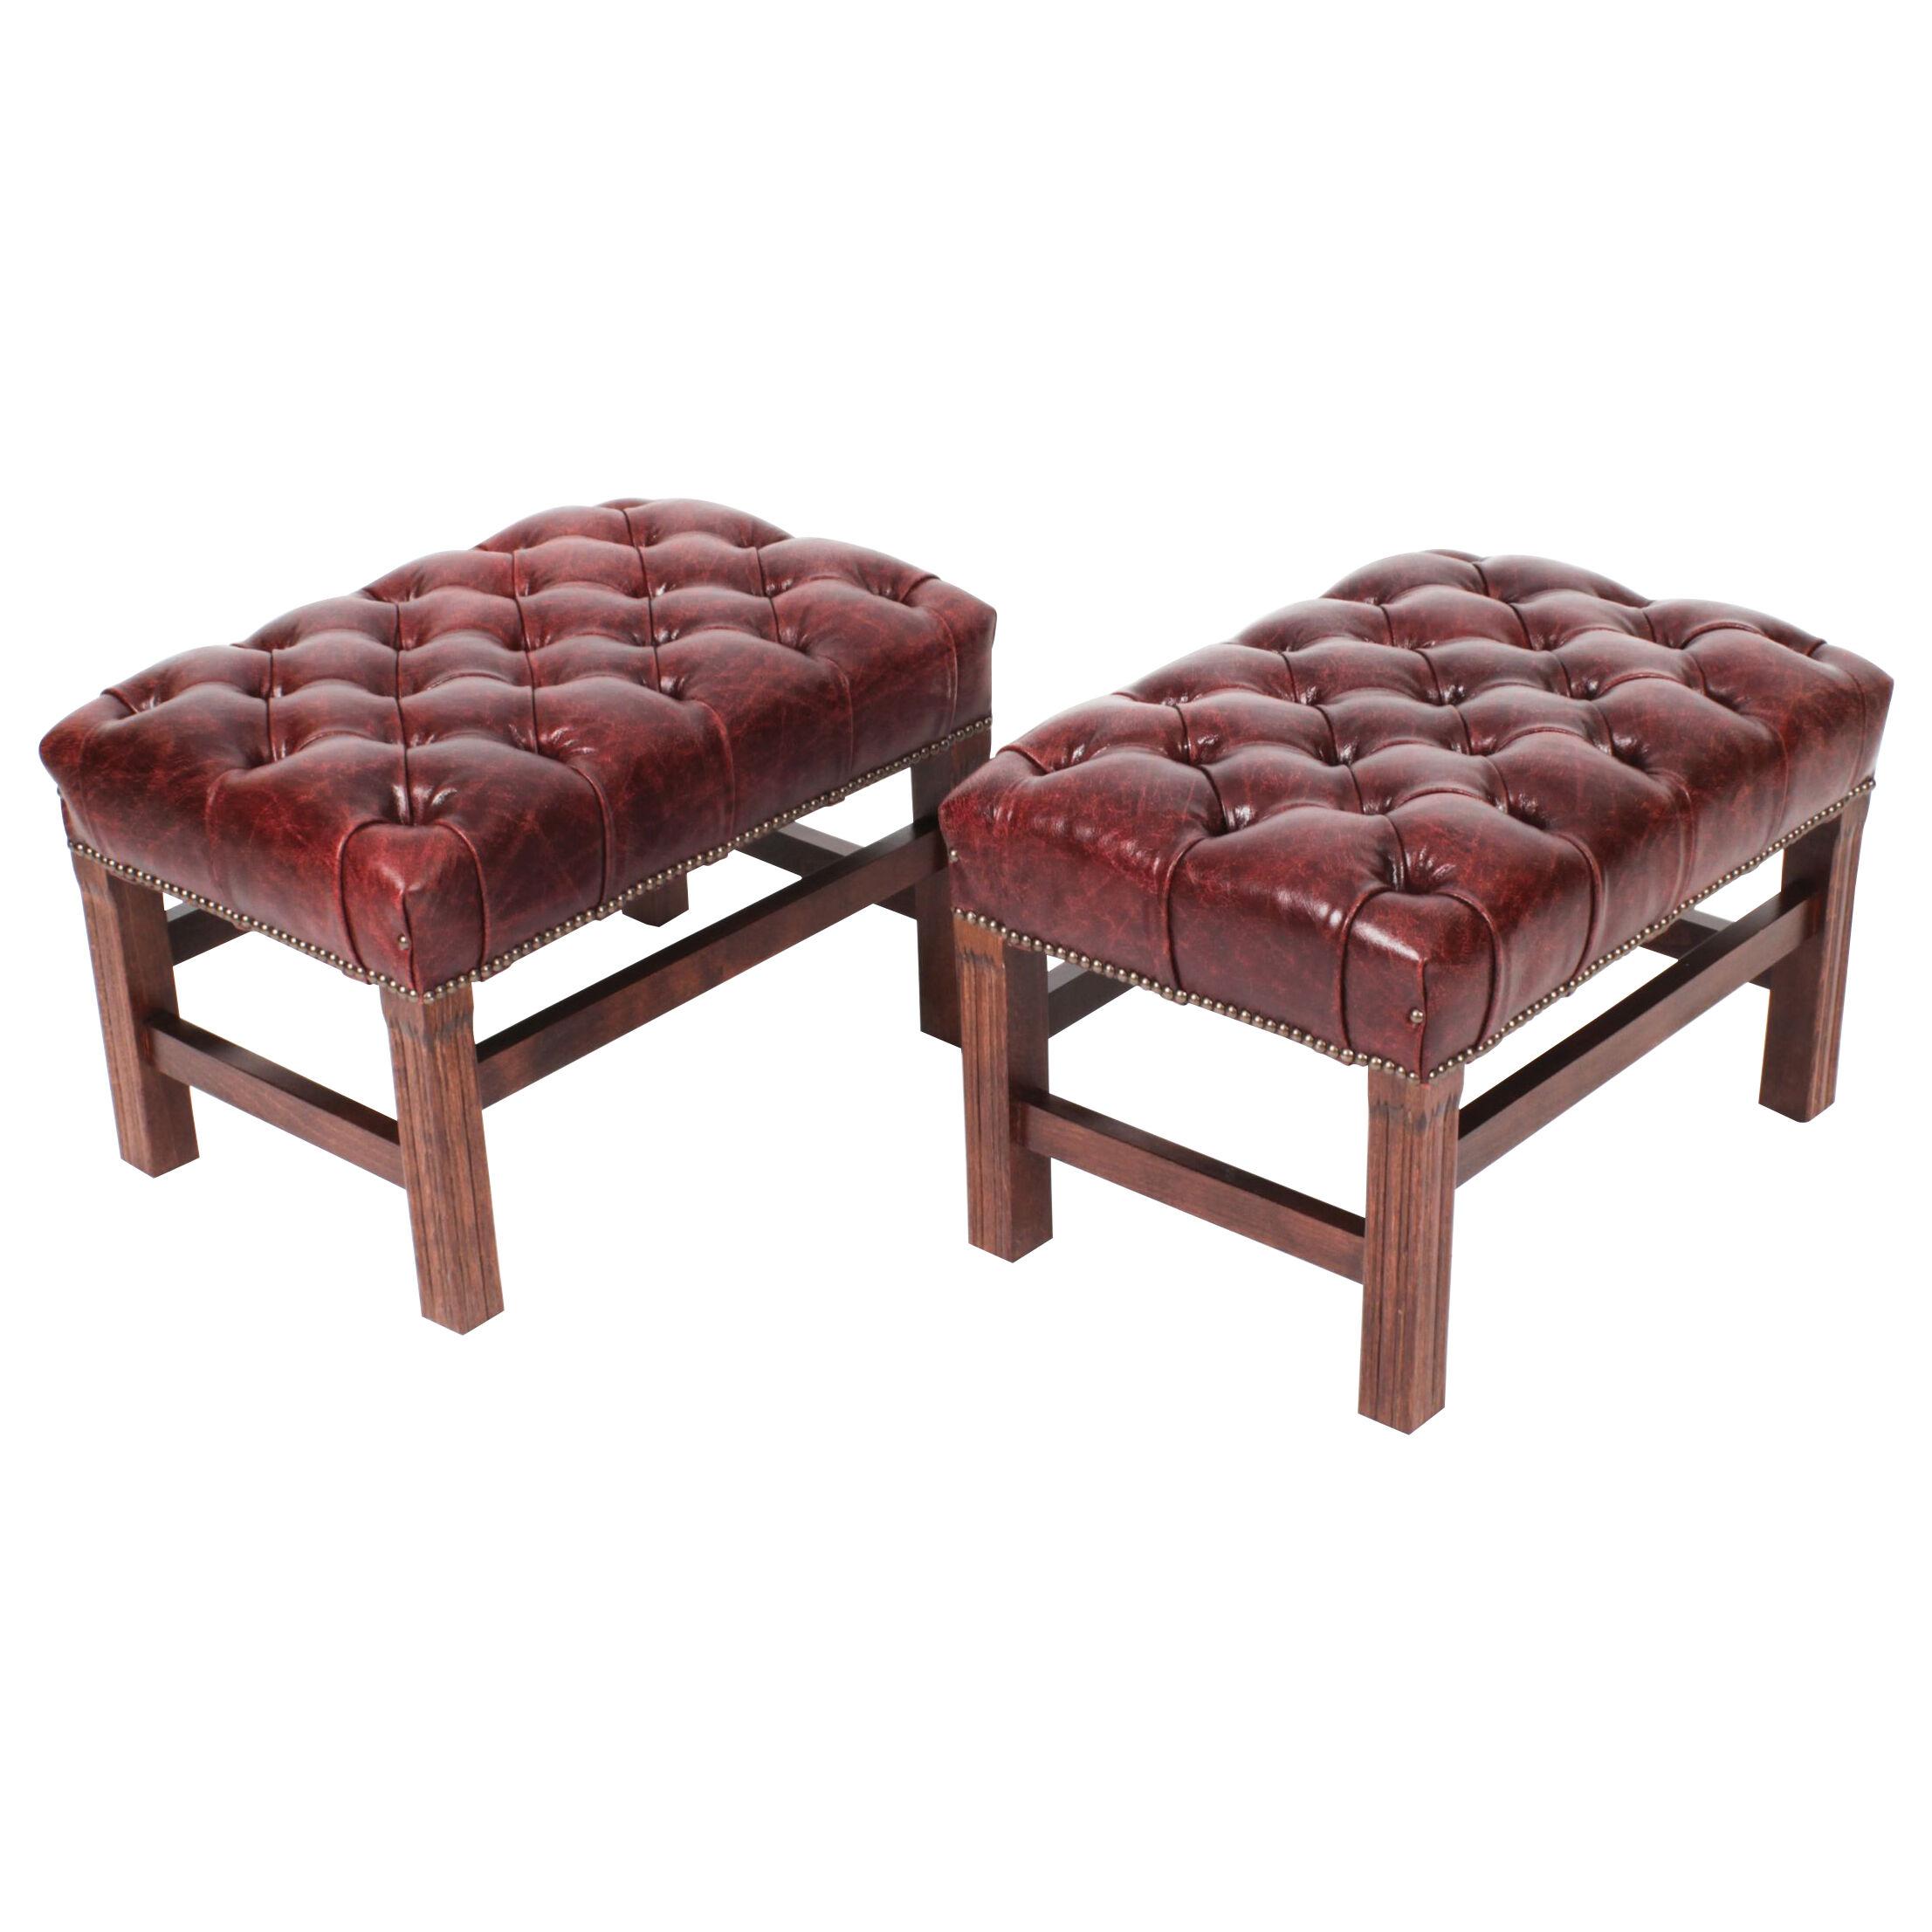 Bespoke Pair Buttoned Leather Stools Murano Port 20th C